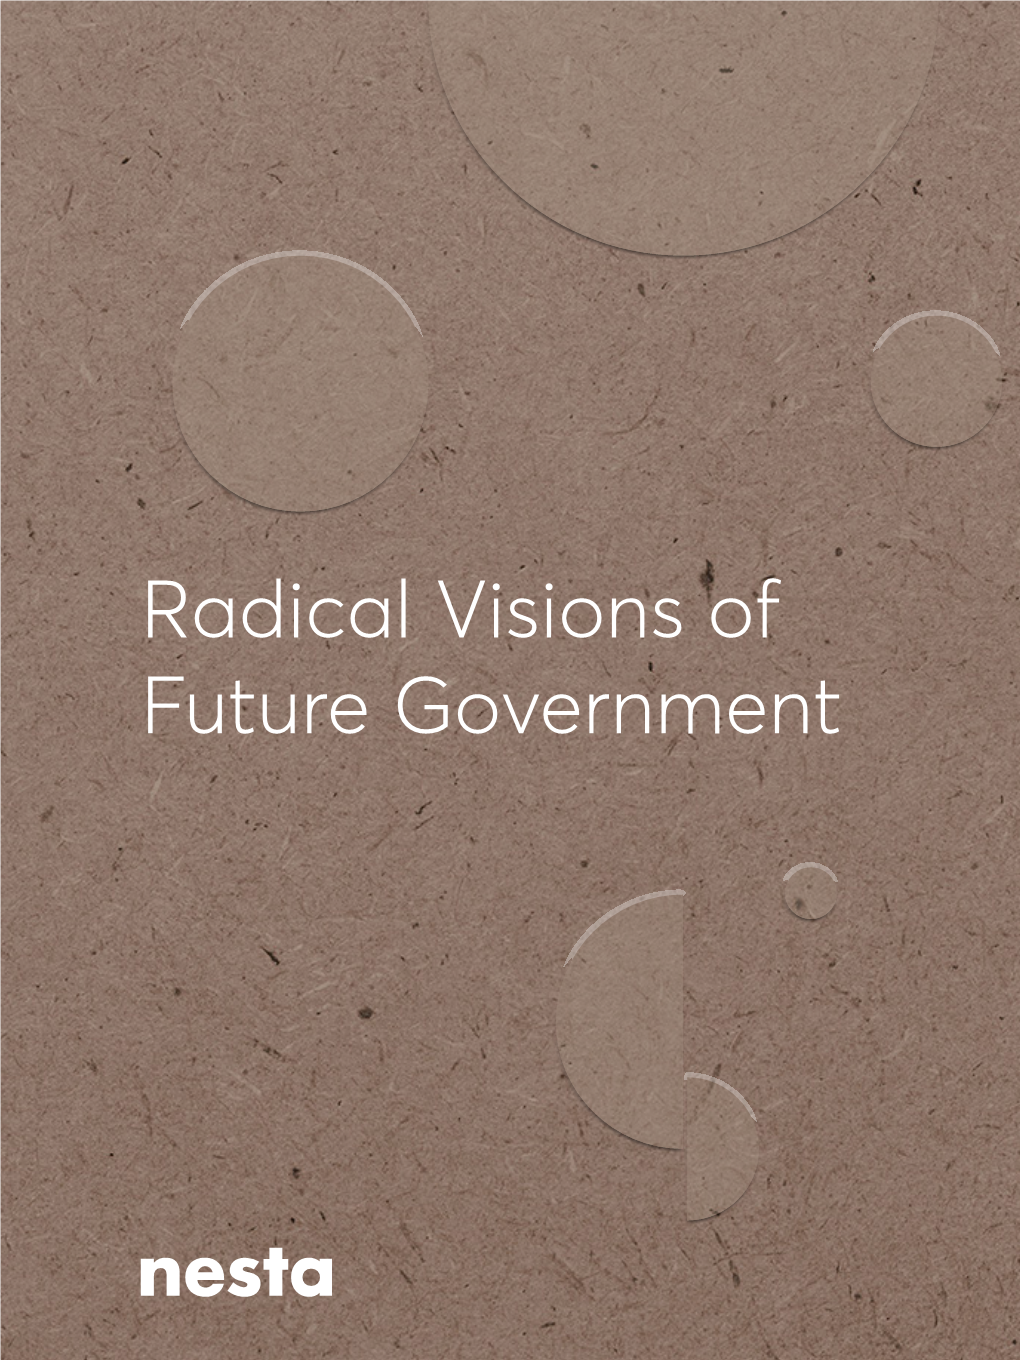 Radical Visions of Future Government